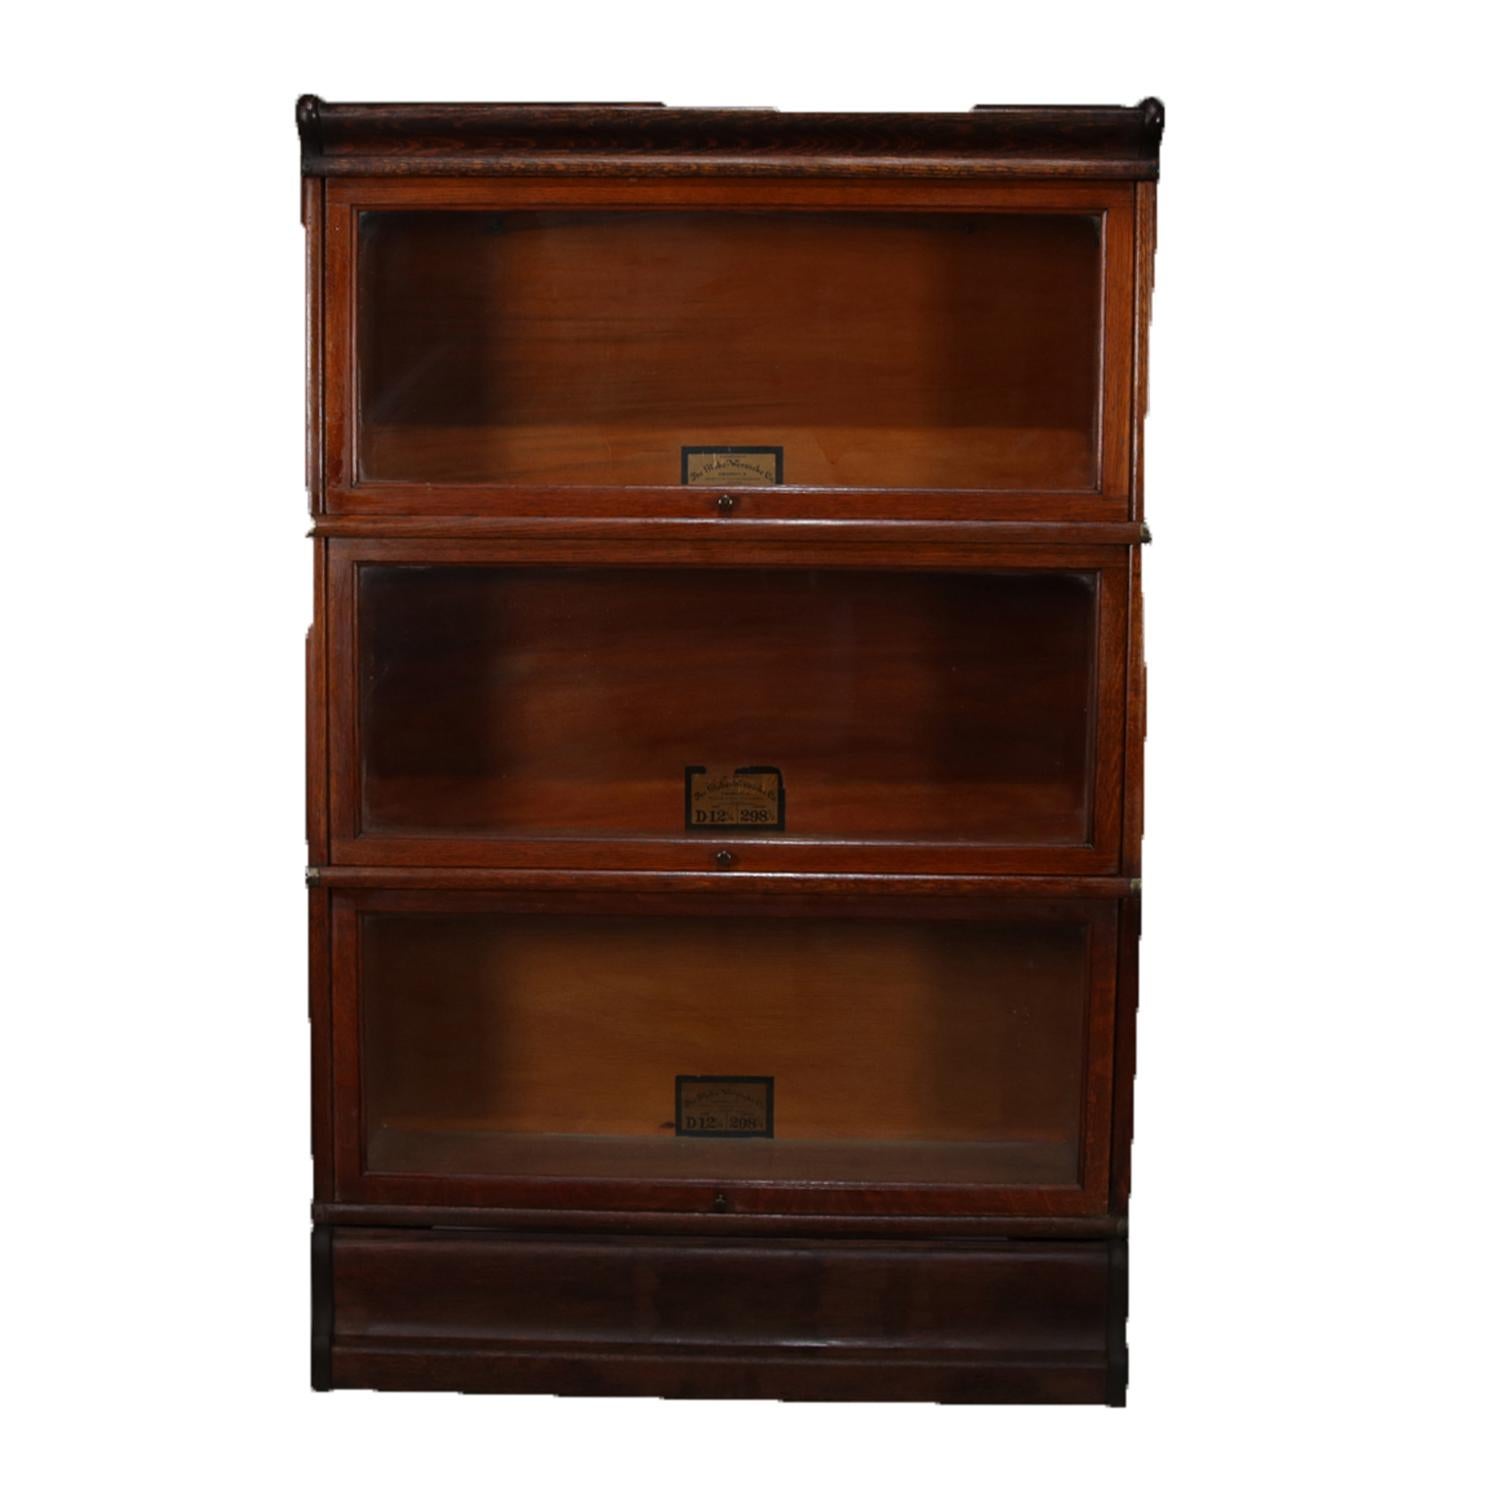 Antique Arts & Crafts Barrister bookcase by Globe-Wernicke Co. features quarter sawn oak construction with four stacks and pull-out glass doors, original labels, relevant to the legal profession and law offices, circa 1910.

Measures: 53.25